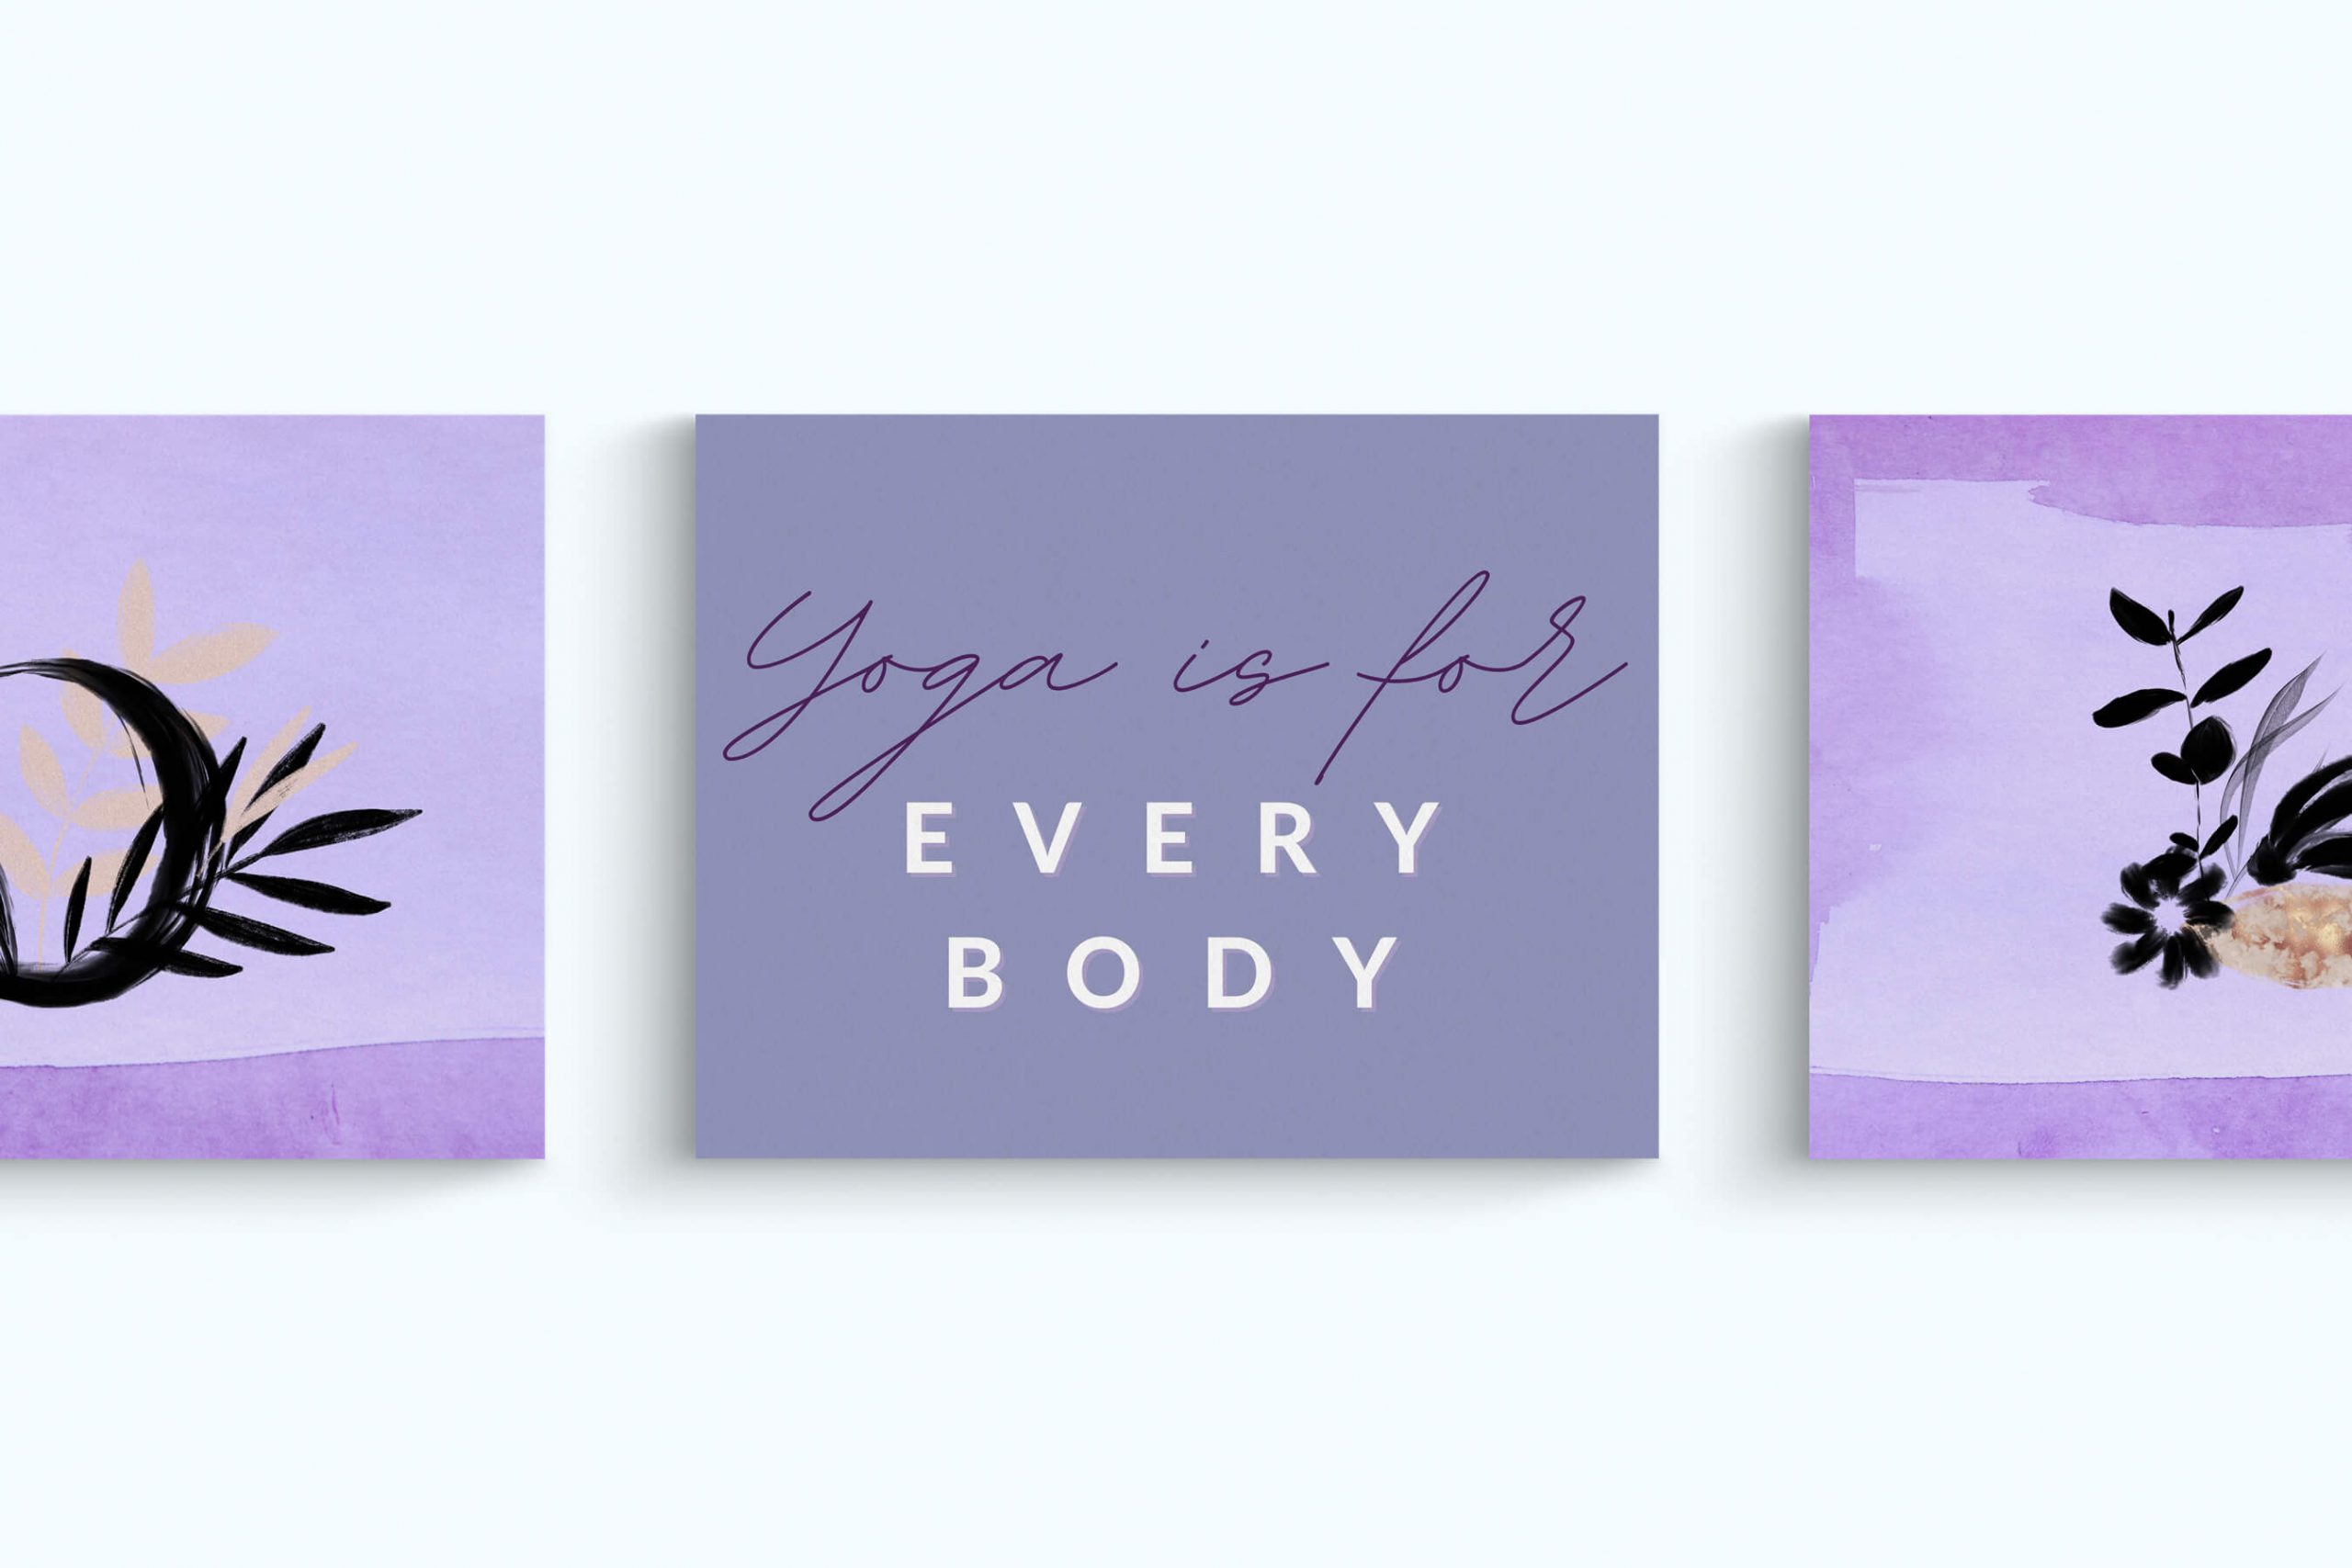 Images of graphics designed for a yoga studio